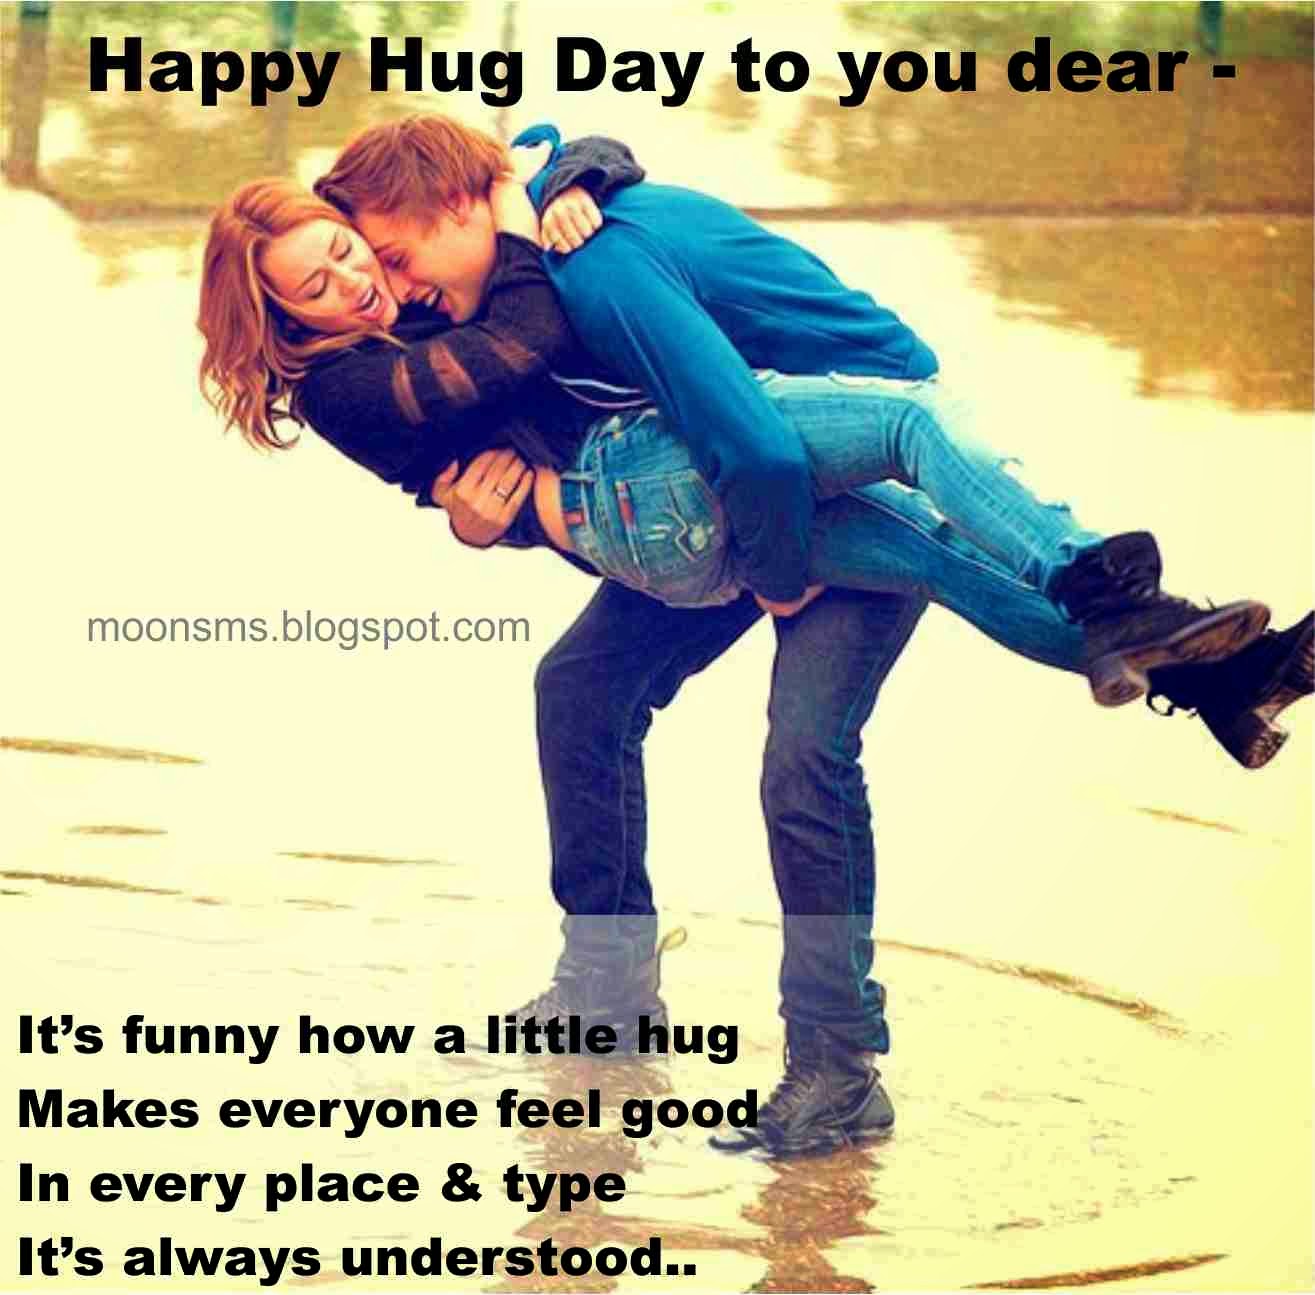 Happy Hug Day sms text message wishes quotes Hug day HD anjmted image picture